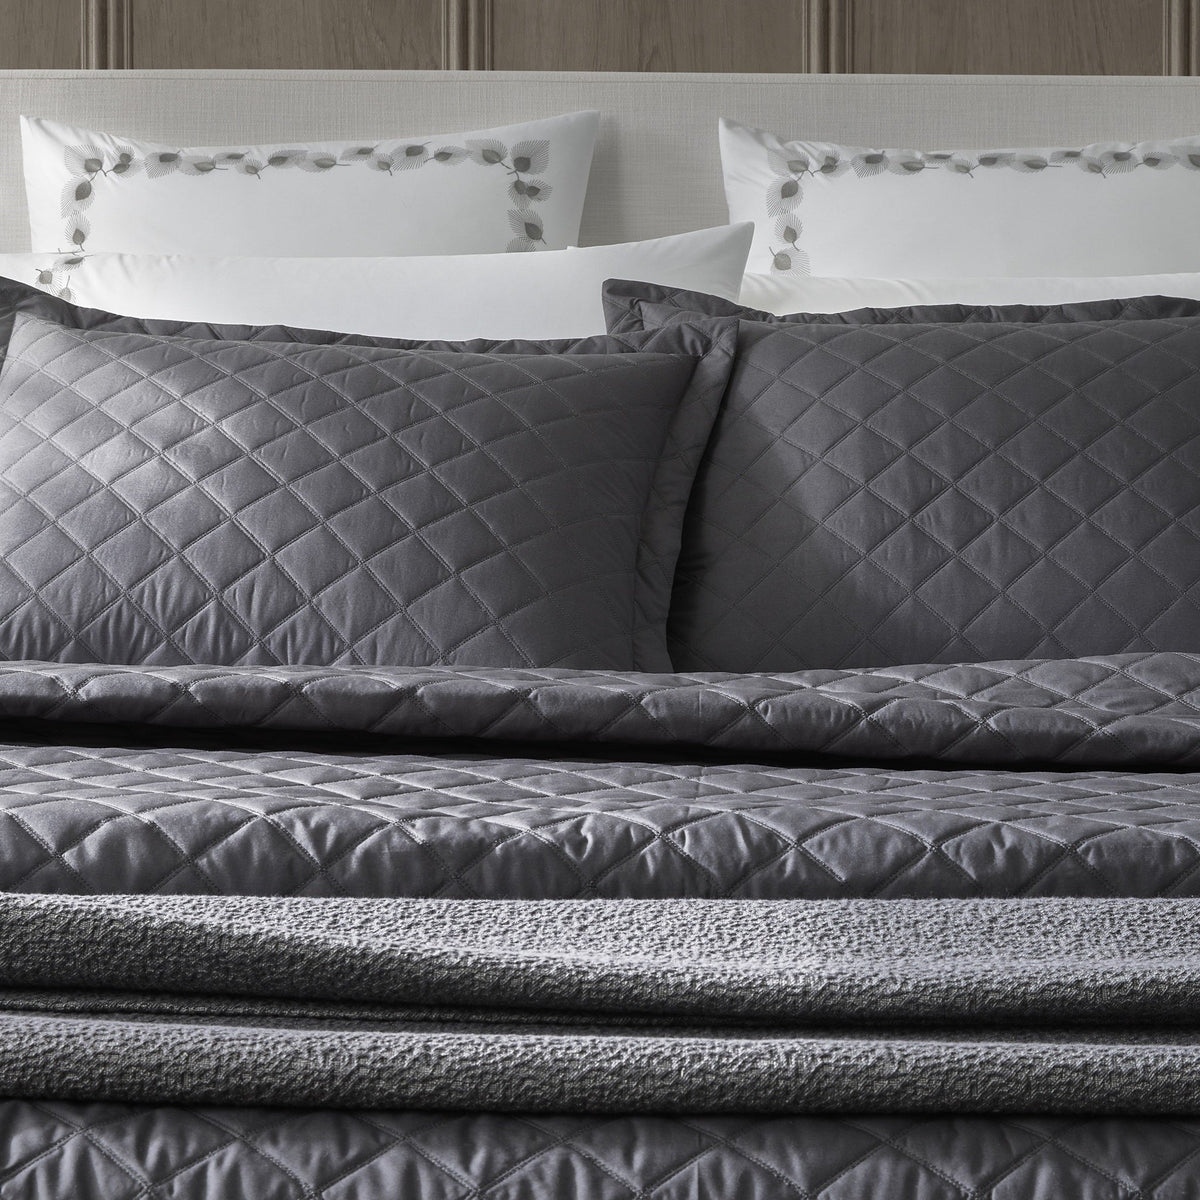 Detail Image of Matouk Milano Quilt Bedding in Carbon Color